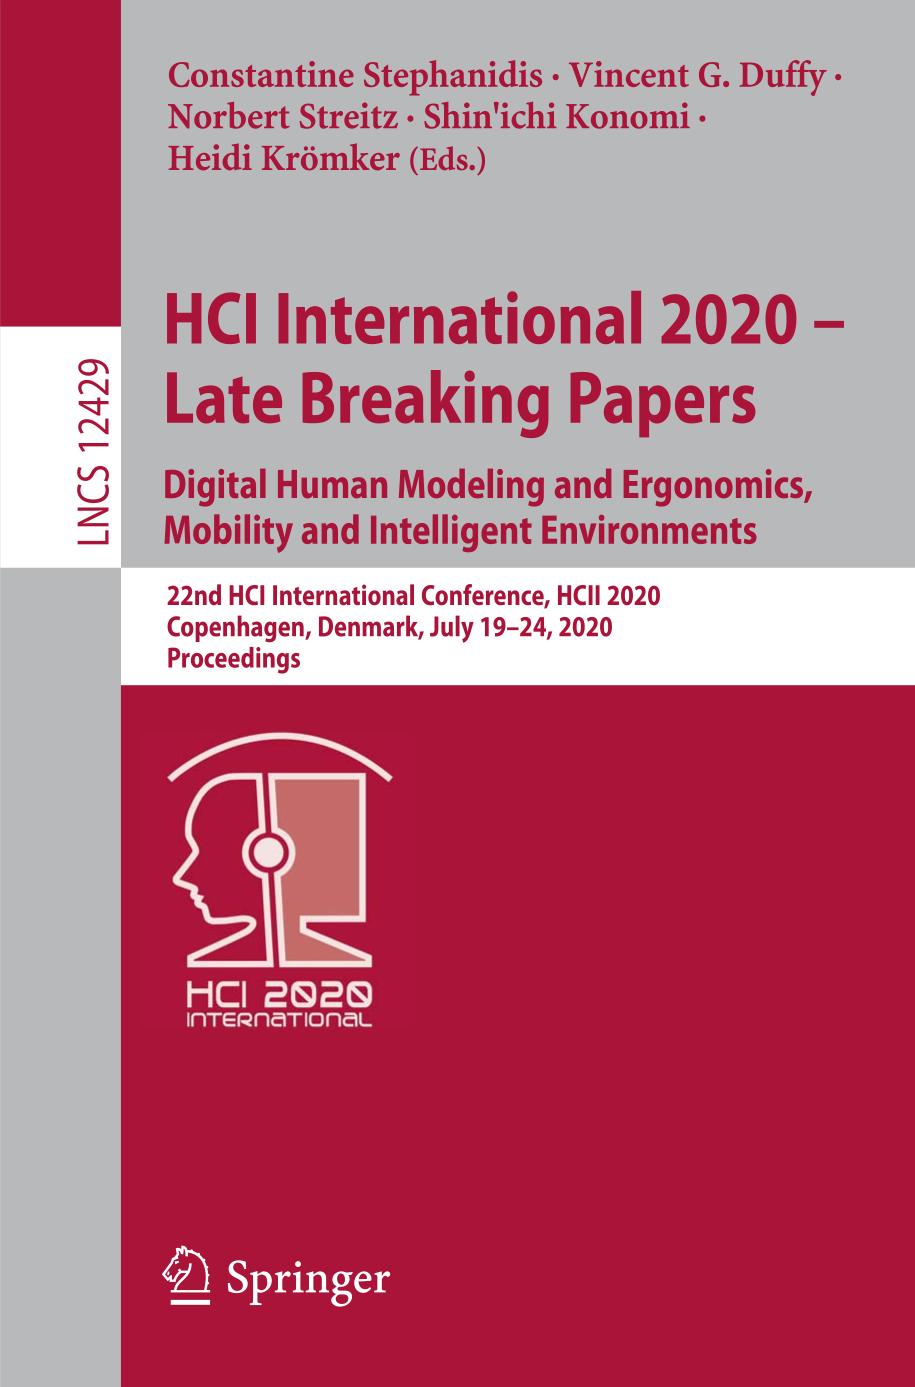 HCI International 2020 - Late Breaking Papers: Digital Human Modeling and Ergonomics, Mobility and Intelligent Environments : 22nd HCI International Conference, HCII 2020, Copenhagen, Denmark, July 19-24, 2020, Proceedings